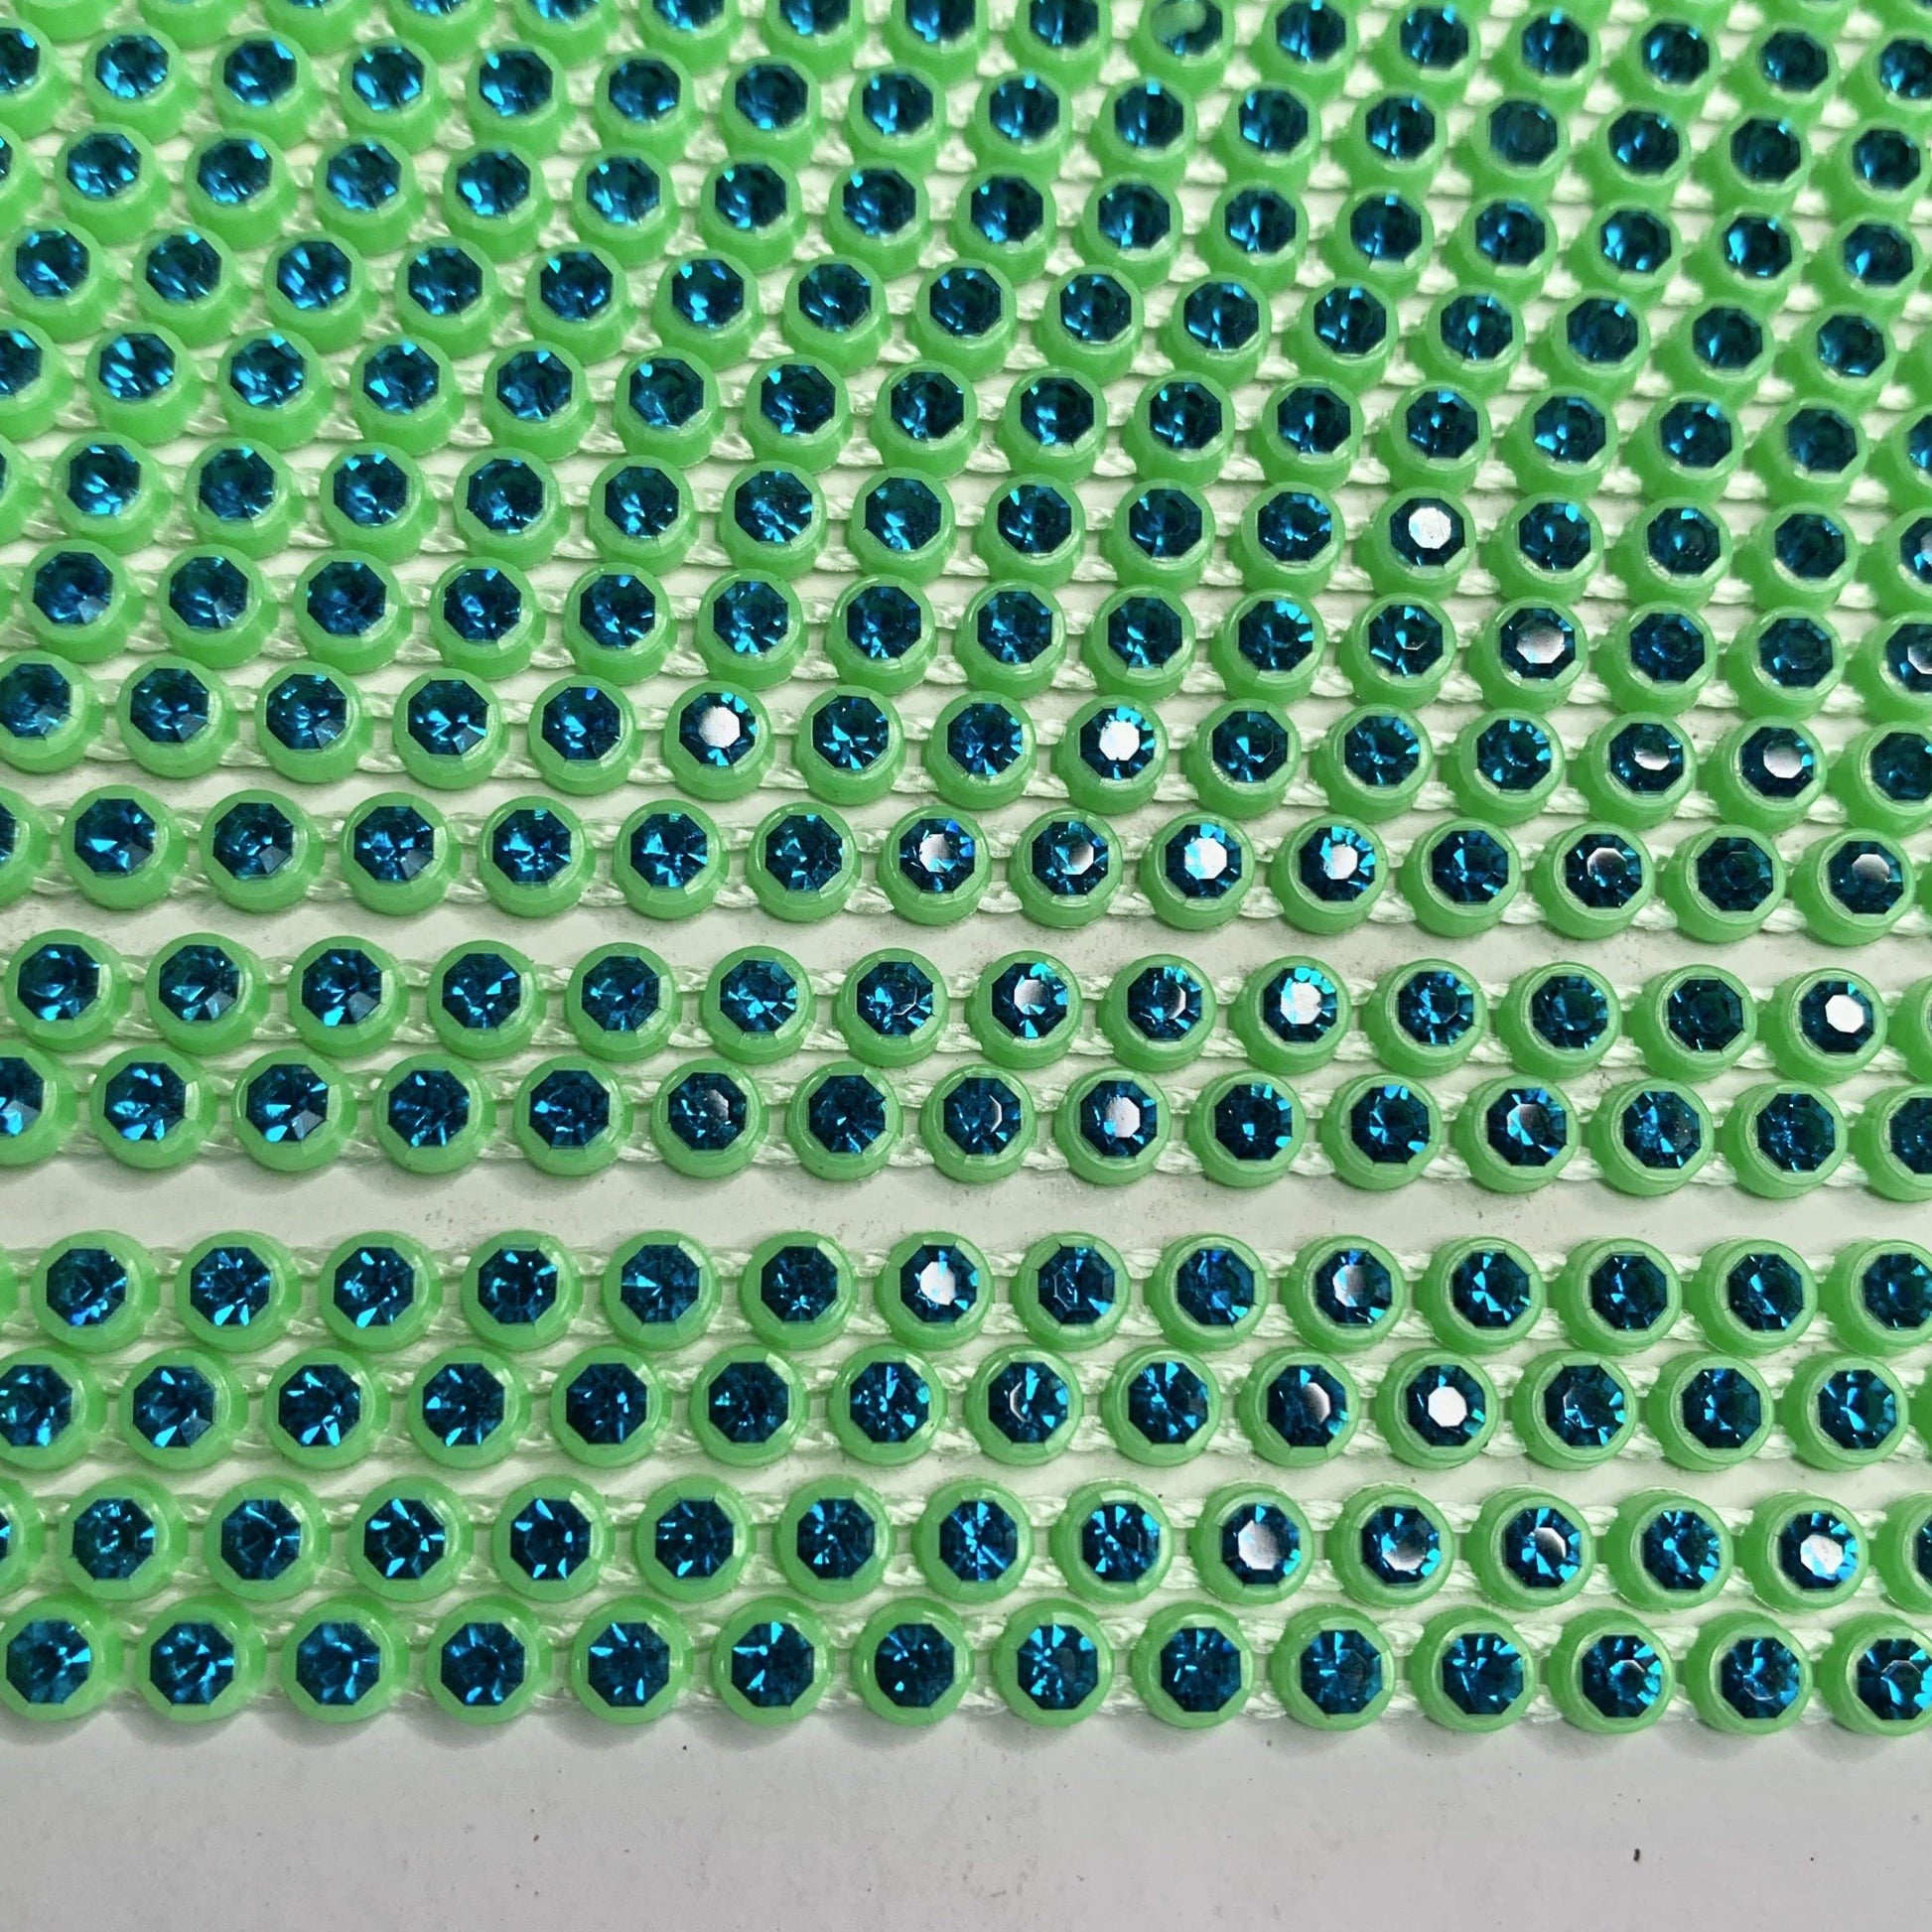 Sundaylace Creations & Bling Ss8 Plastic Rhinestone Banding Rope Ss8 Plastic Rhinestone Chain Banding, Blue Stone in Lime Green Plastic Rhinestone Chain Rope, Sold in yard